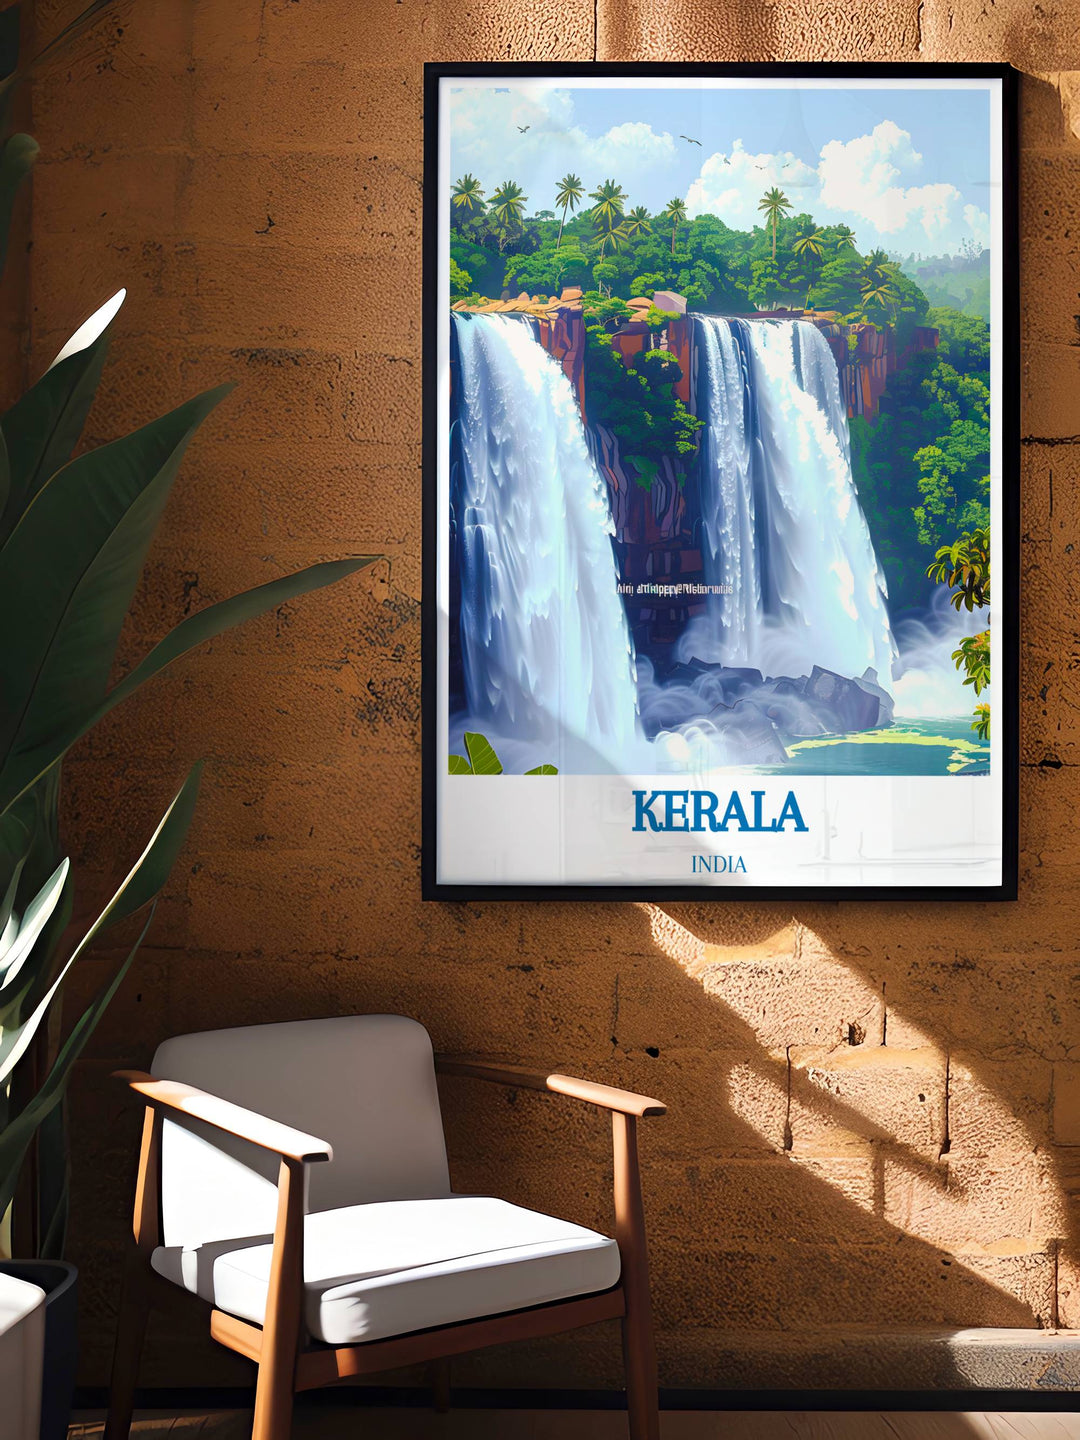 Detailed canvas art of Athirappilly Waterfalls, offering a glimpse into the breathtaking scenery of Keralas most famous waterfall.